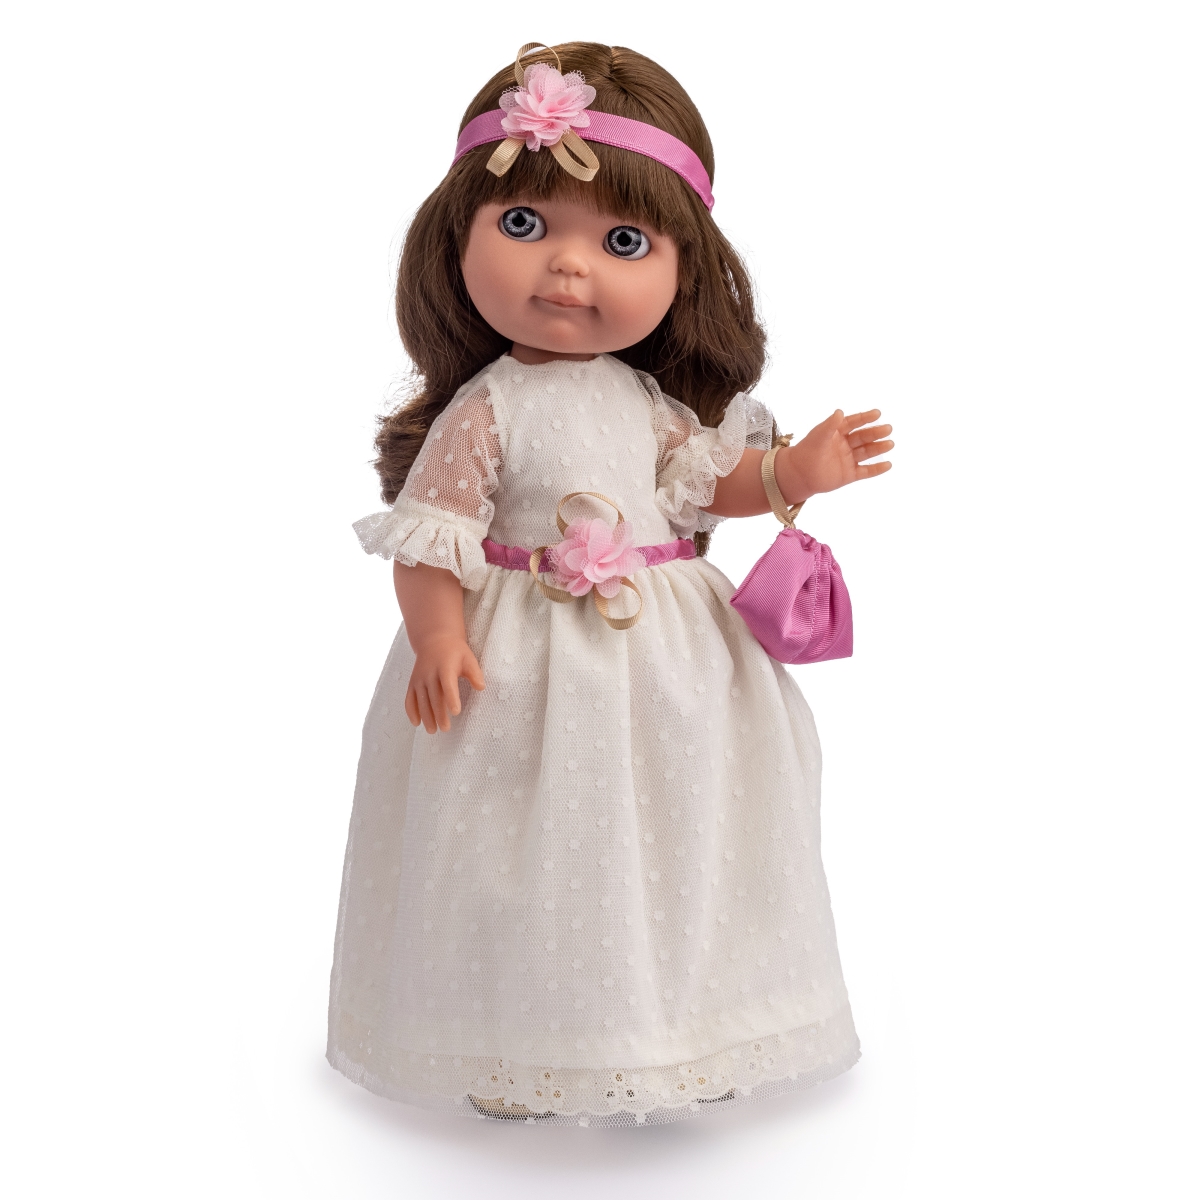 Picture of JC Toys 32001 Chloe All Vinyl Posable Chloe Royal Themed with Brown Rooted Hair - 15 in.